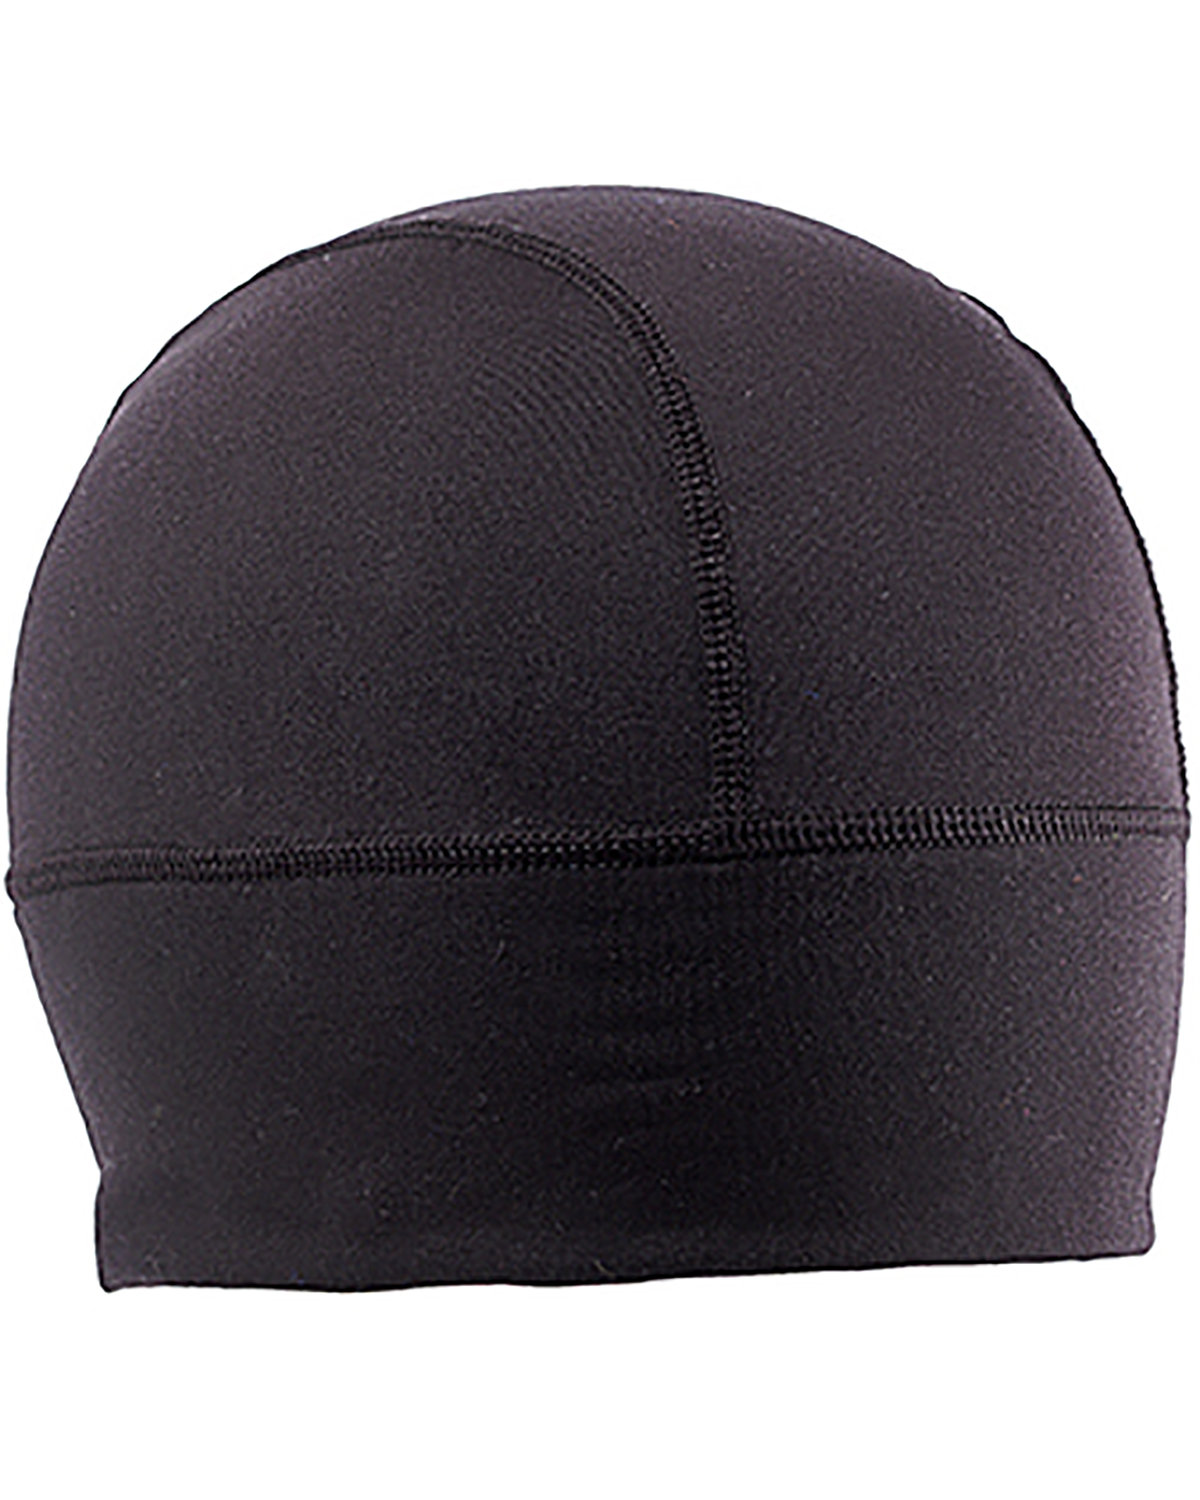 Front view of Performance Beanie